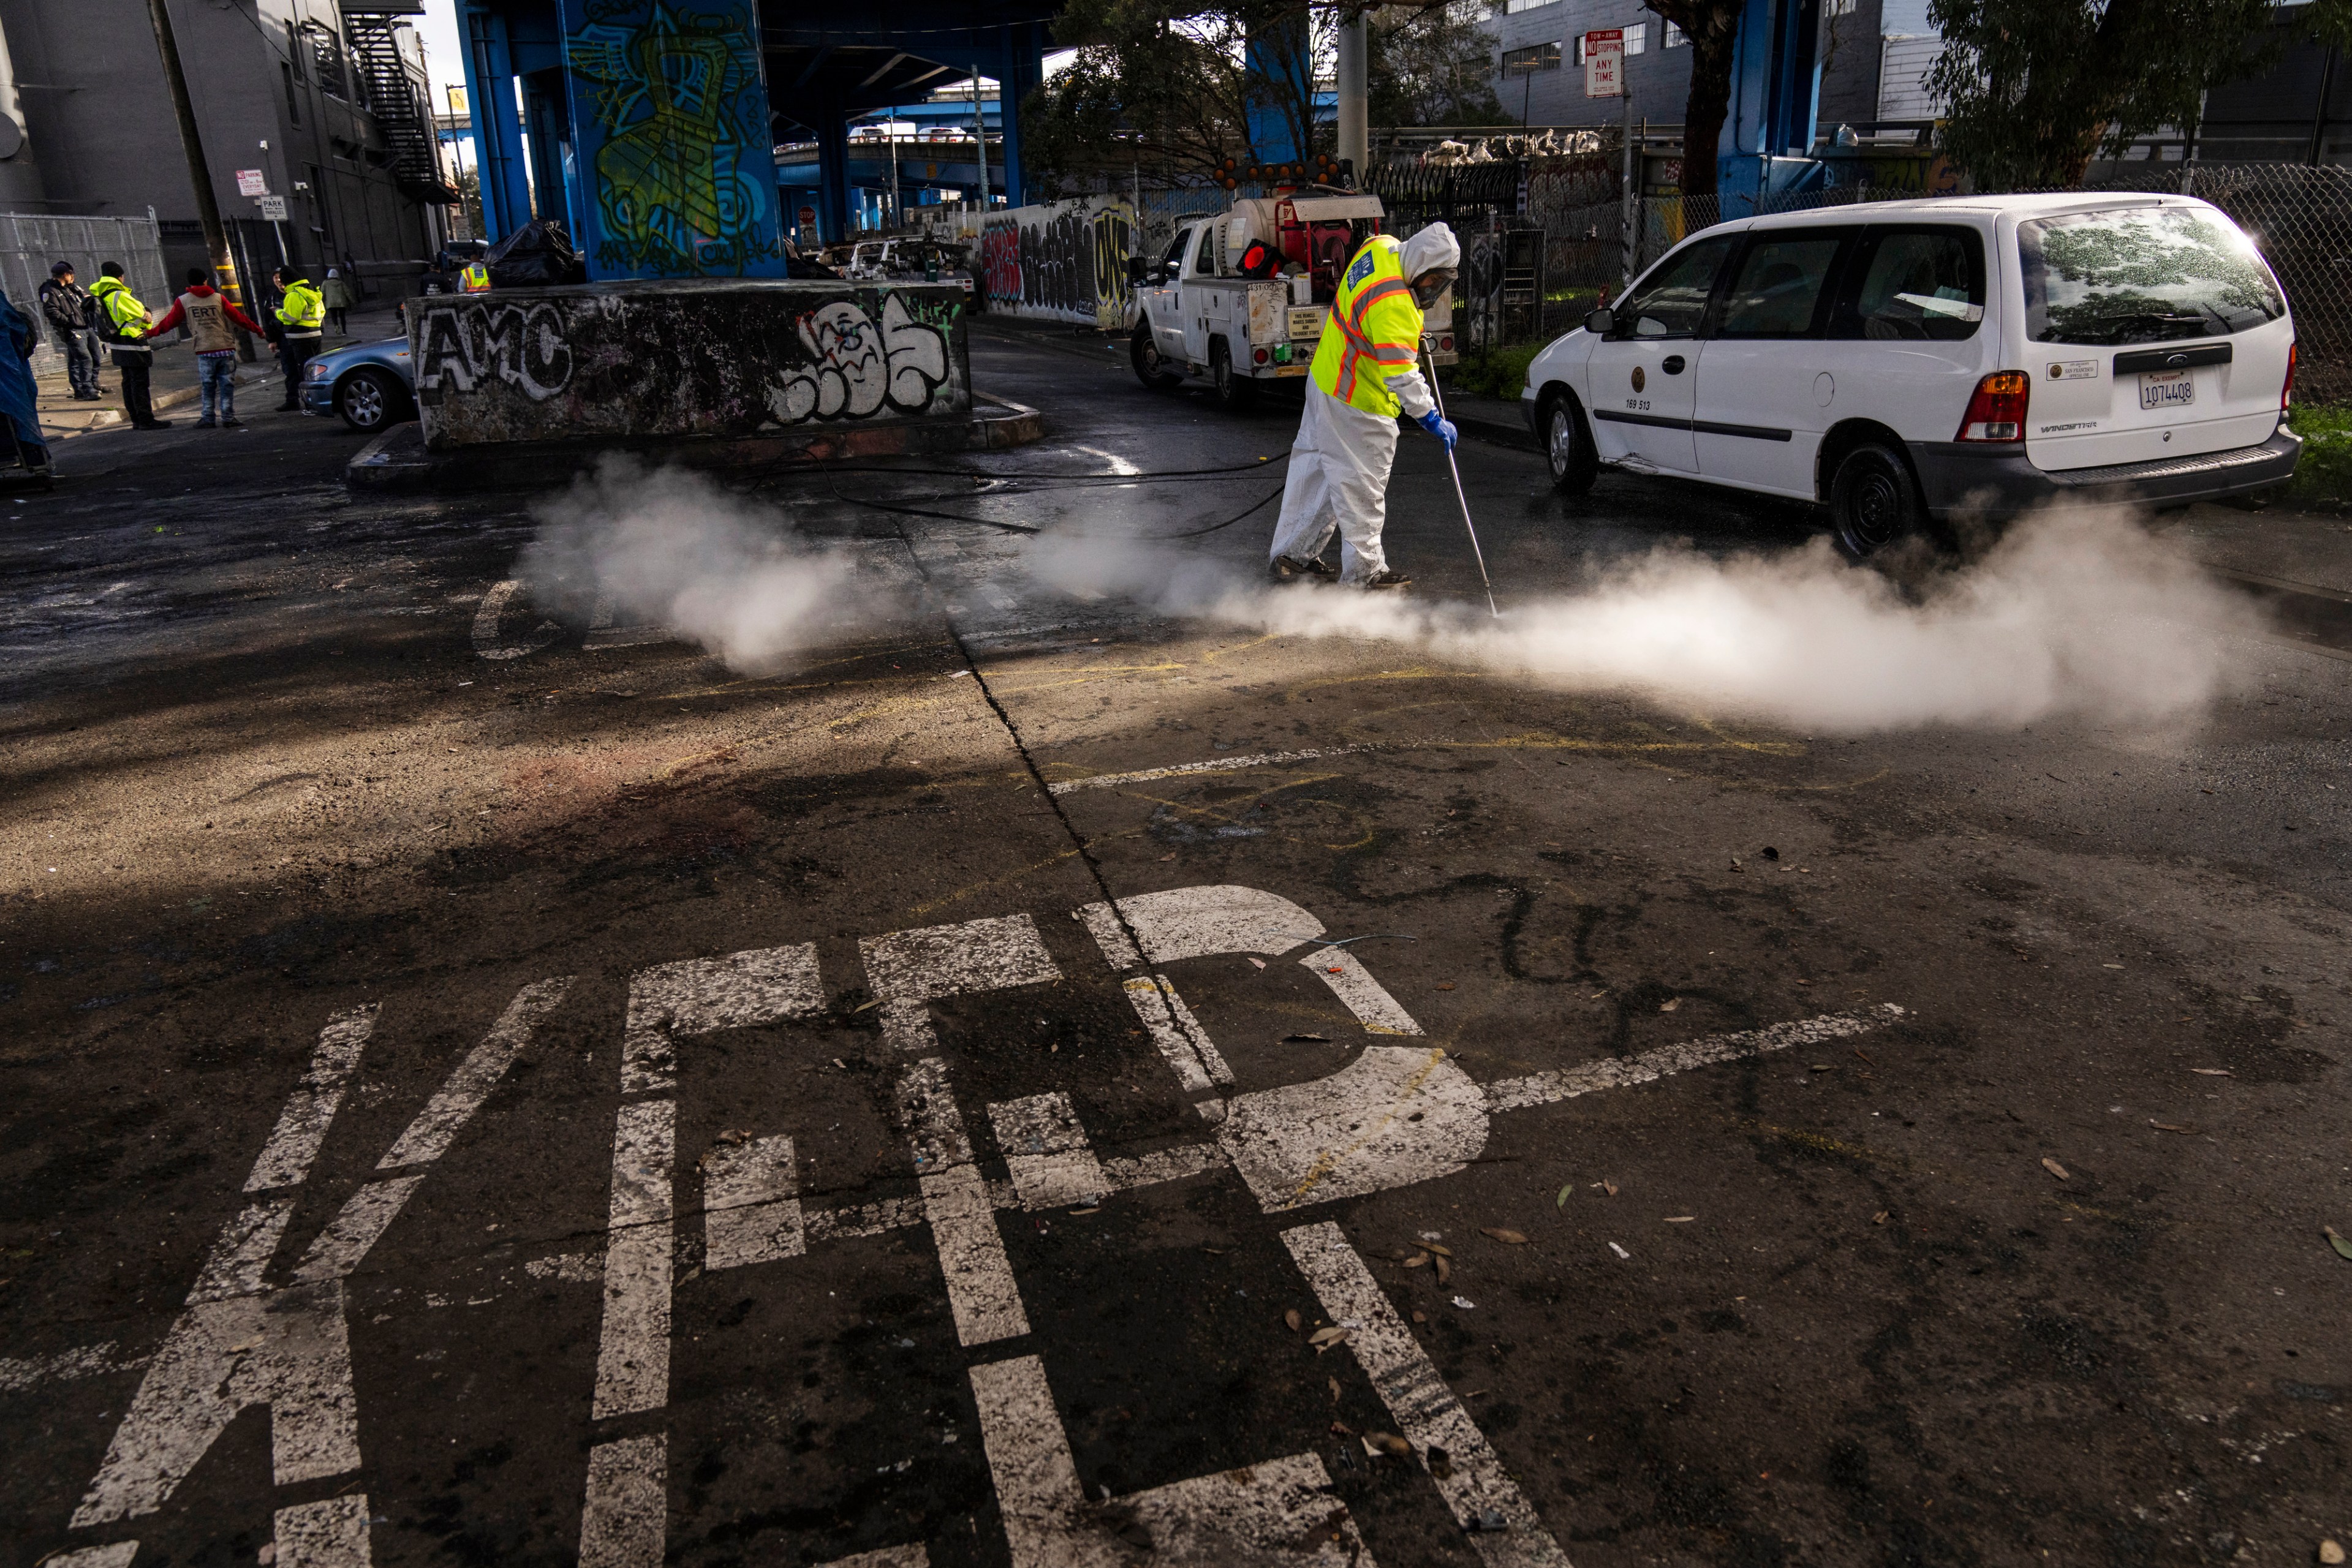 A worker in protective gear pressure-washes a street emitting steam, near graffiti-covered walls and parked cars, while onlookers, some in reflective vests, observe.